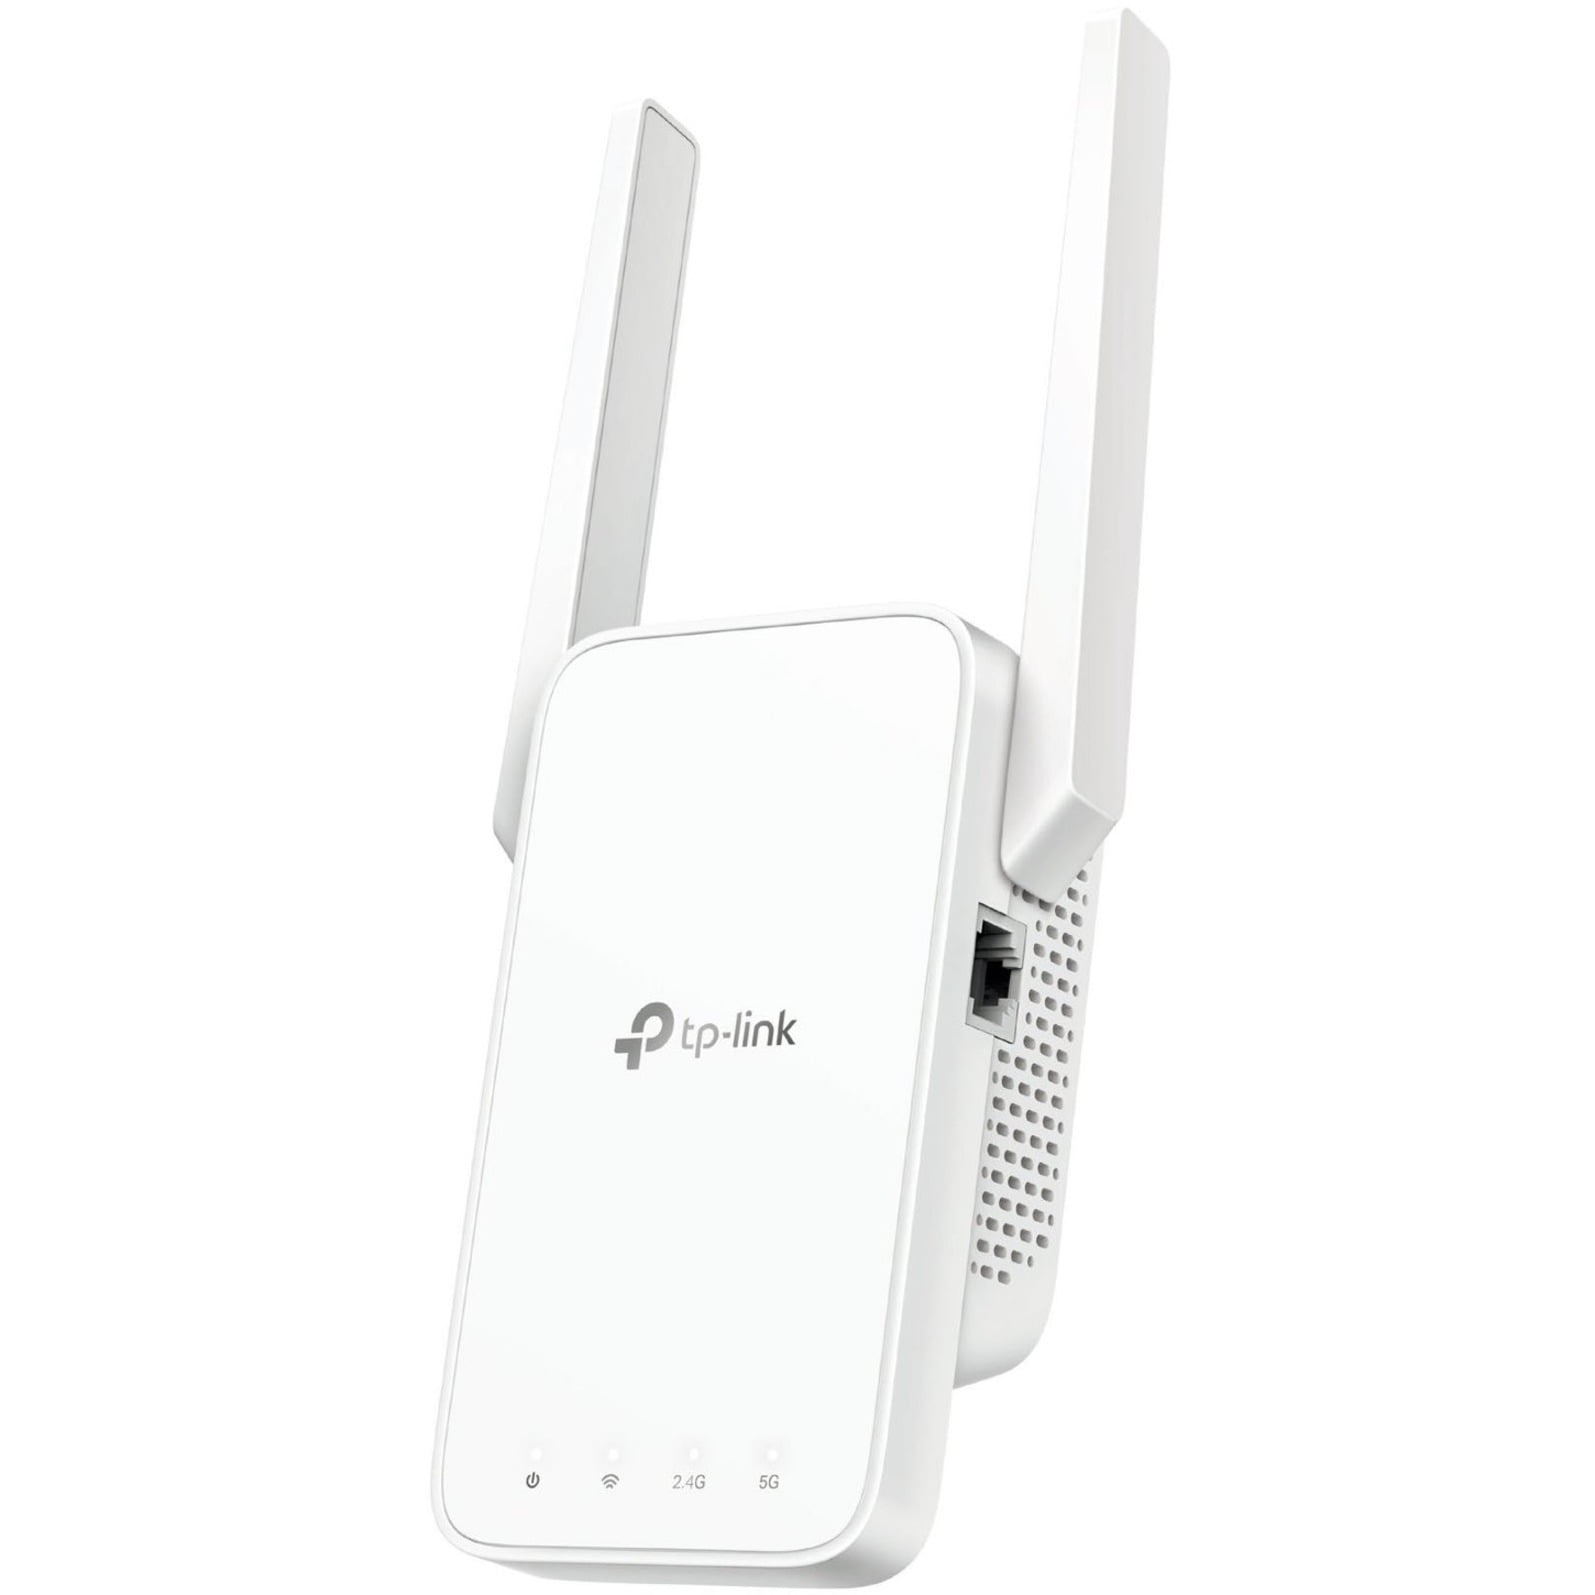 disk Demokrati Lil TP-Link AC1200 WiFi Extender (RE315), Covers Up to 1500 Sq.ft and 25  Devices, 1200Mbps Dual Band WiFi Booster with External Antennas, WiFi  Repeater, Supports OneMesh - Walmart.com